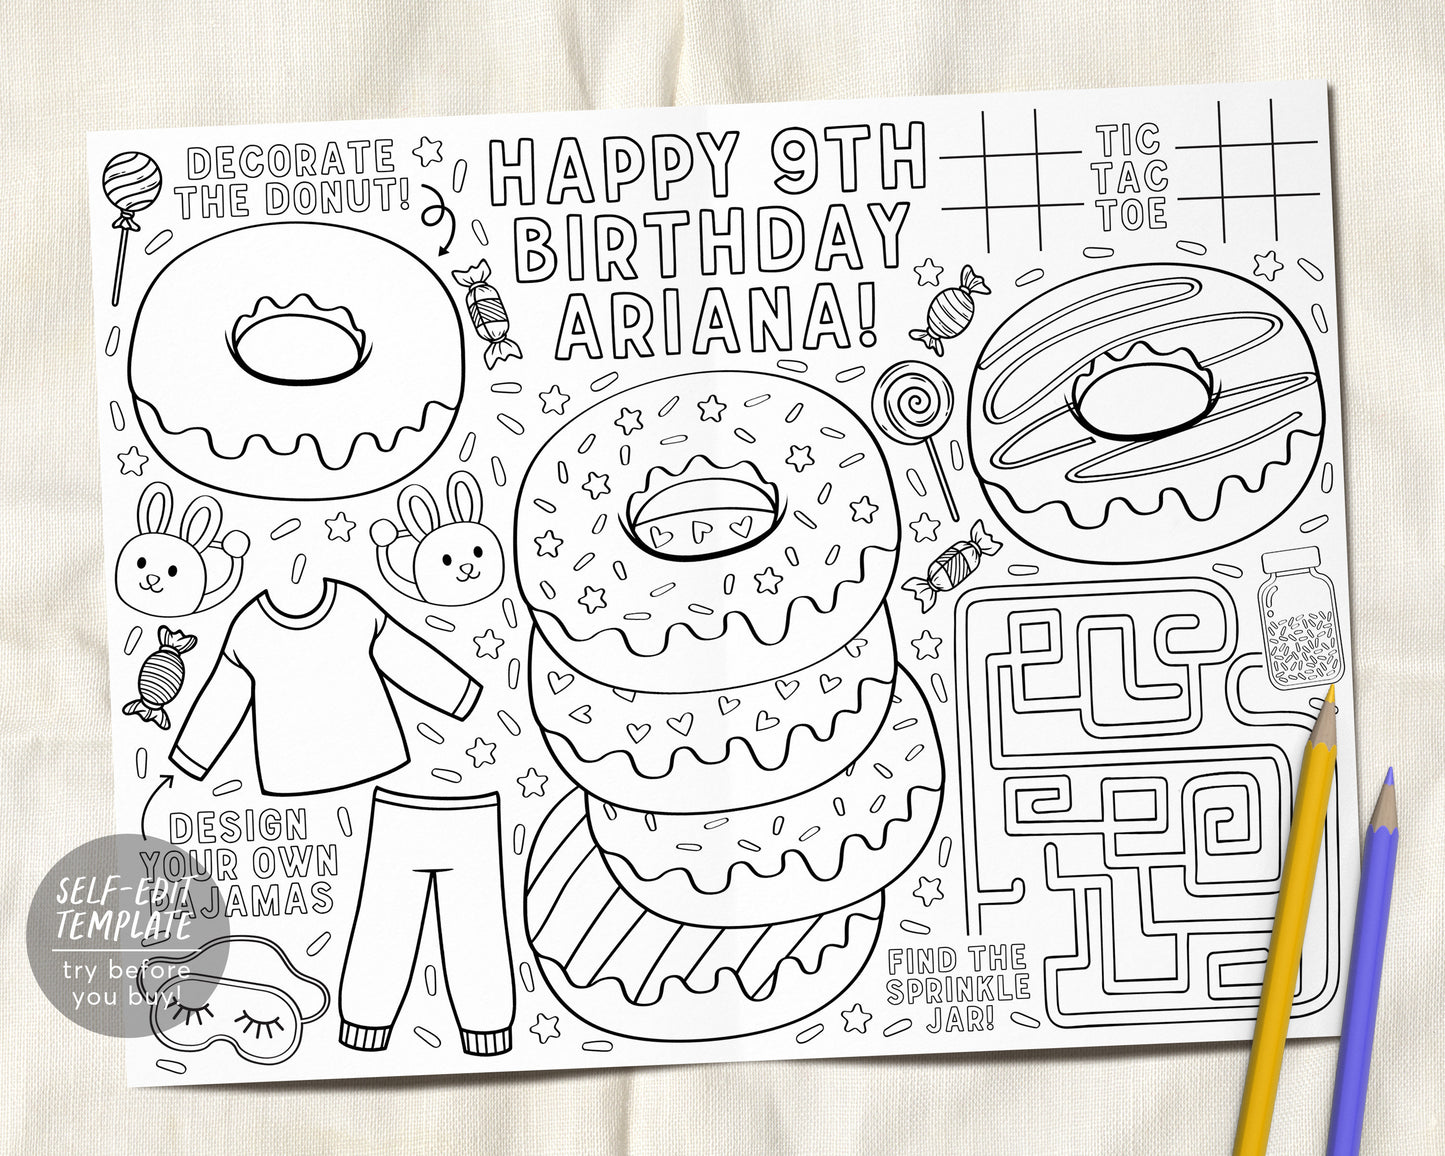 Donuts and Pajamas Birthday Party Coloring Placemat For Kids Editable Template, PJ Party Sleepover Coloring Page Activity Sheet Table Mat